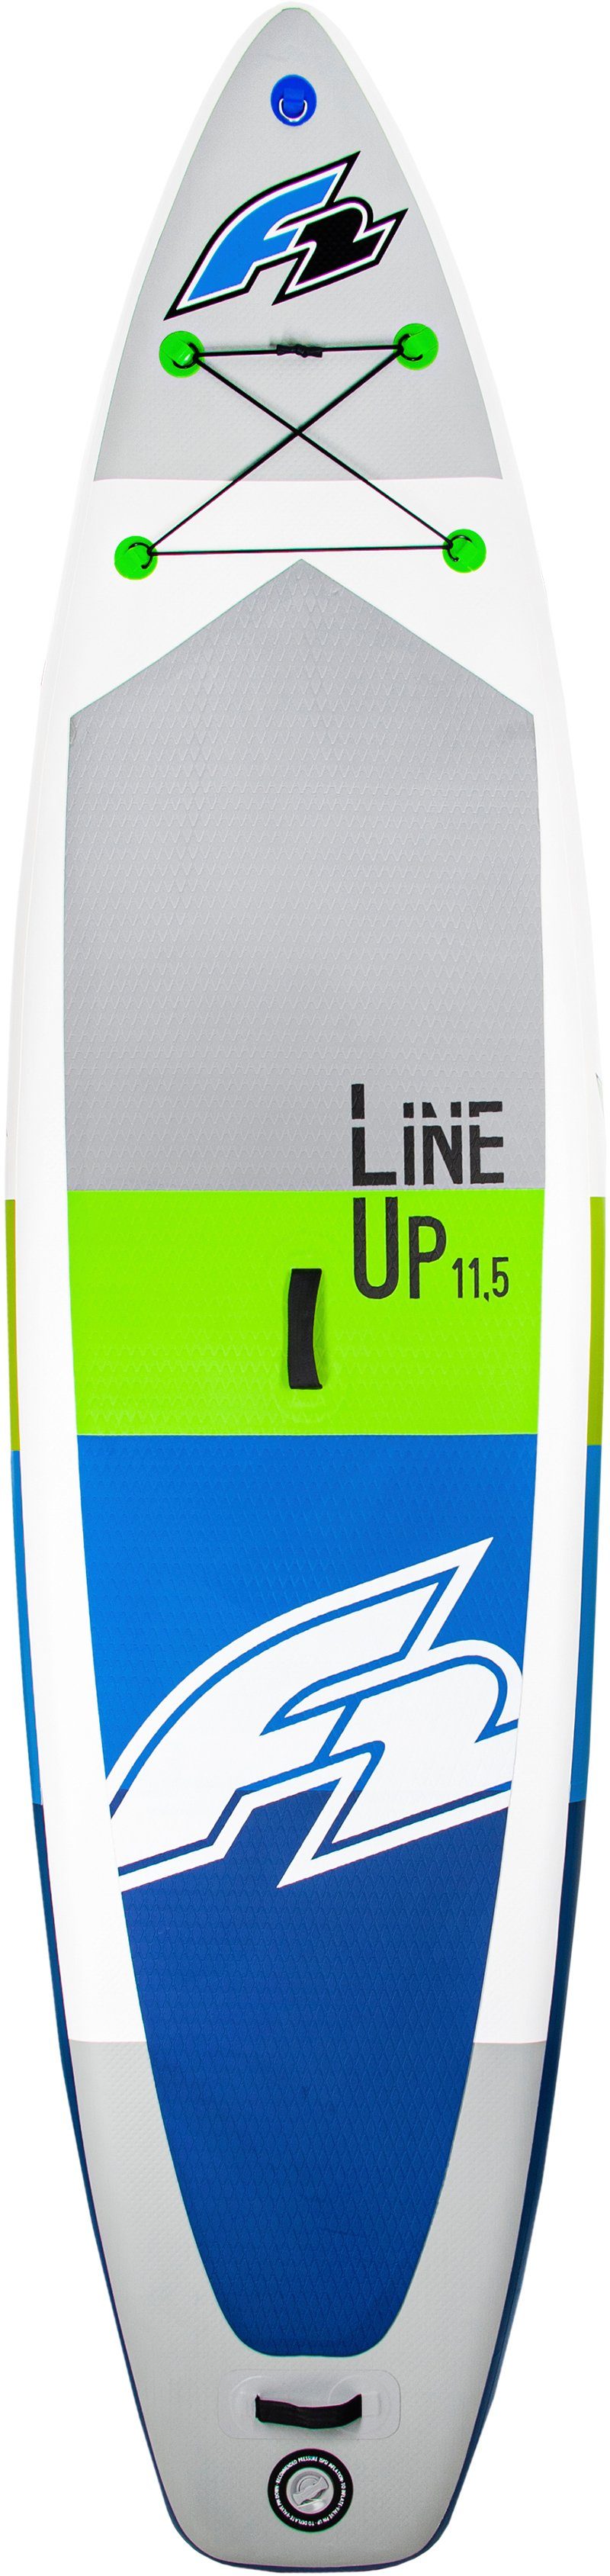 tlg), Line blue F2 Up (Set, Alupaddel, Inflatable Paddling Up 5 Stand mit F2 SMO SUP-Board